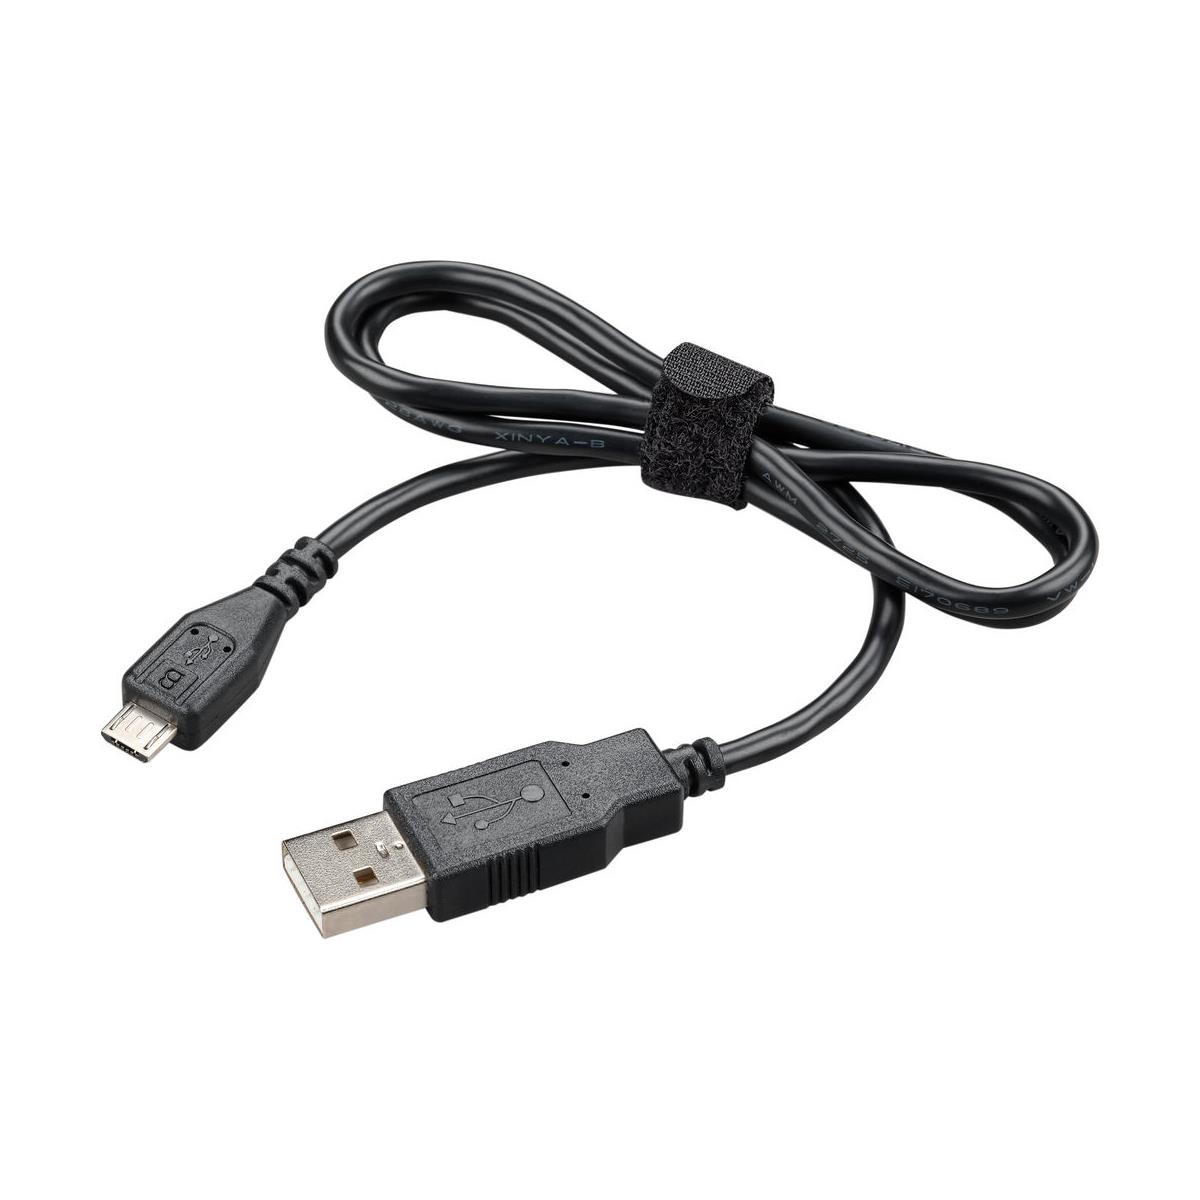 Plantronics Spare USB to Micro USB Cable for Calisto Speakerphone -  89269-01